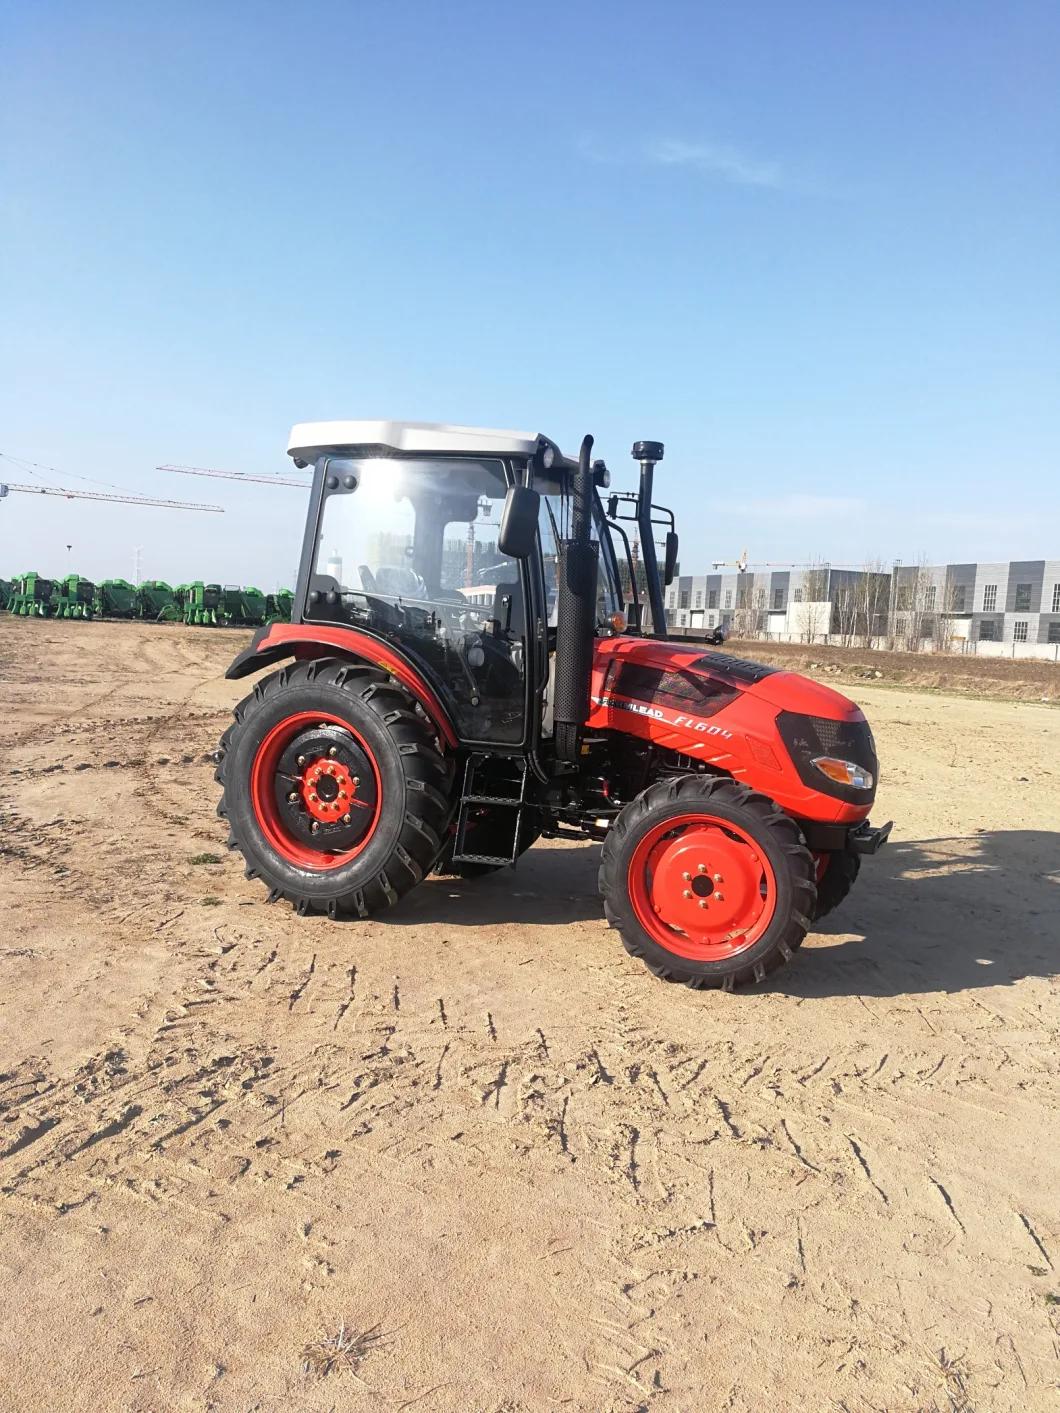 Fram Tractors with Creeper and Shuttle Shift for Front End Loader and Ditch Digger Agricultural Machinery